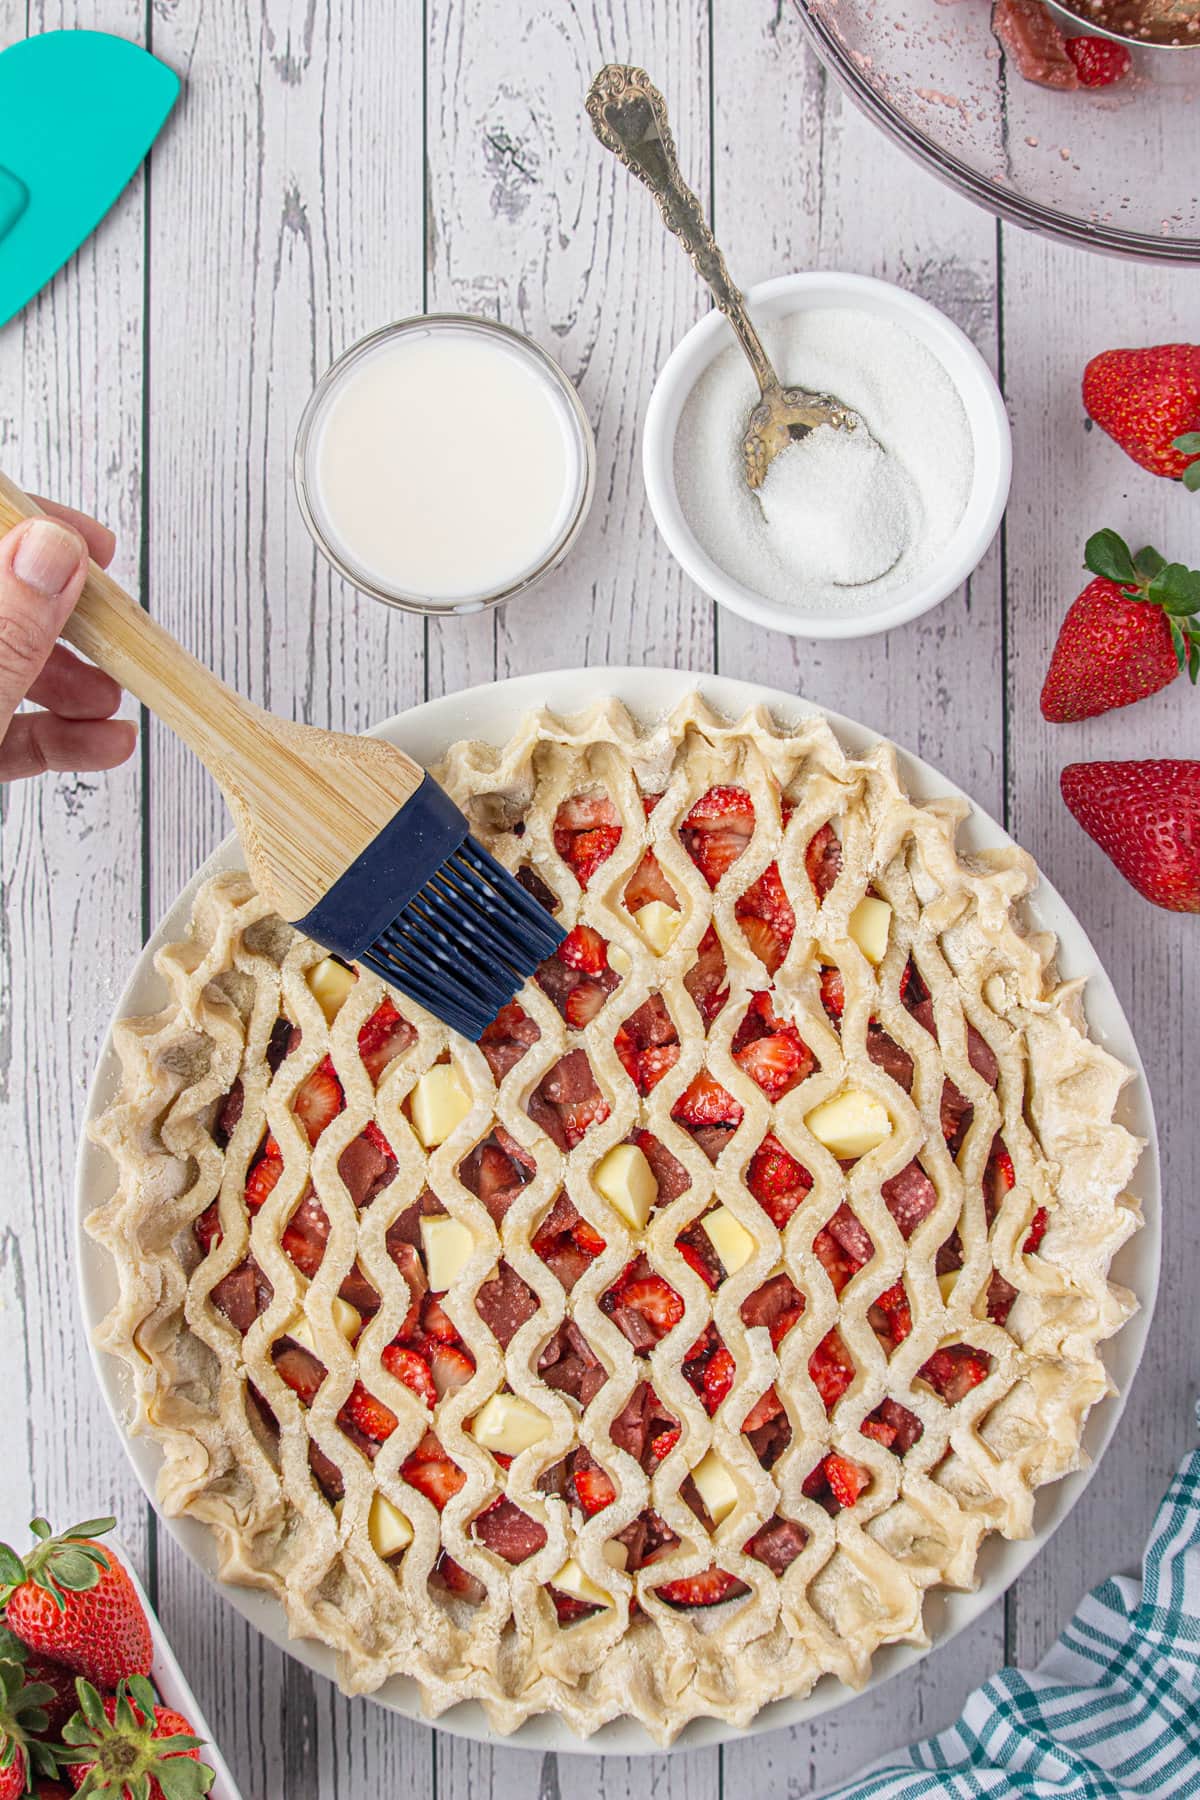 Lattice topped pie being brushed with milk.